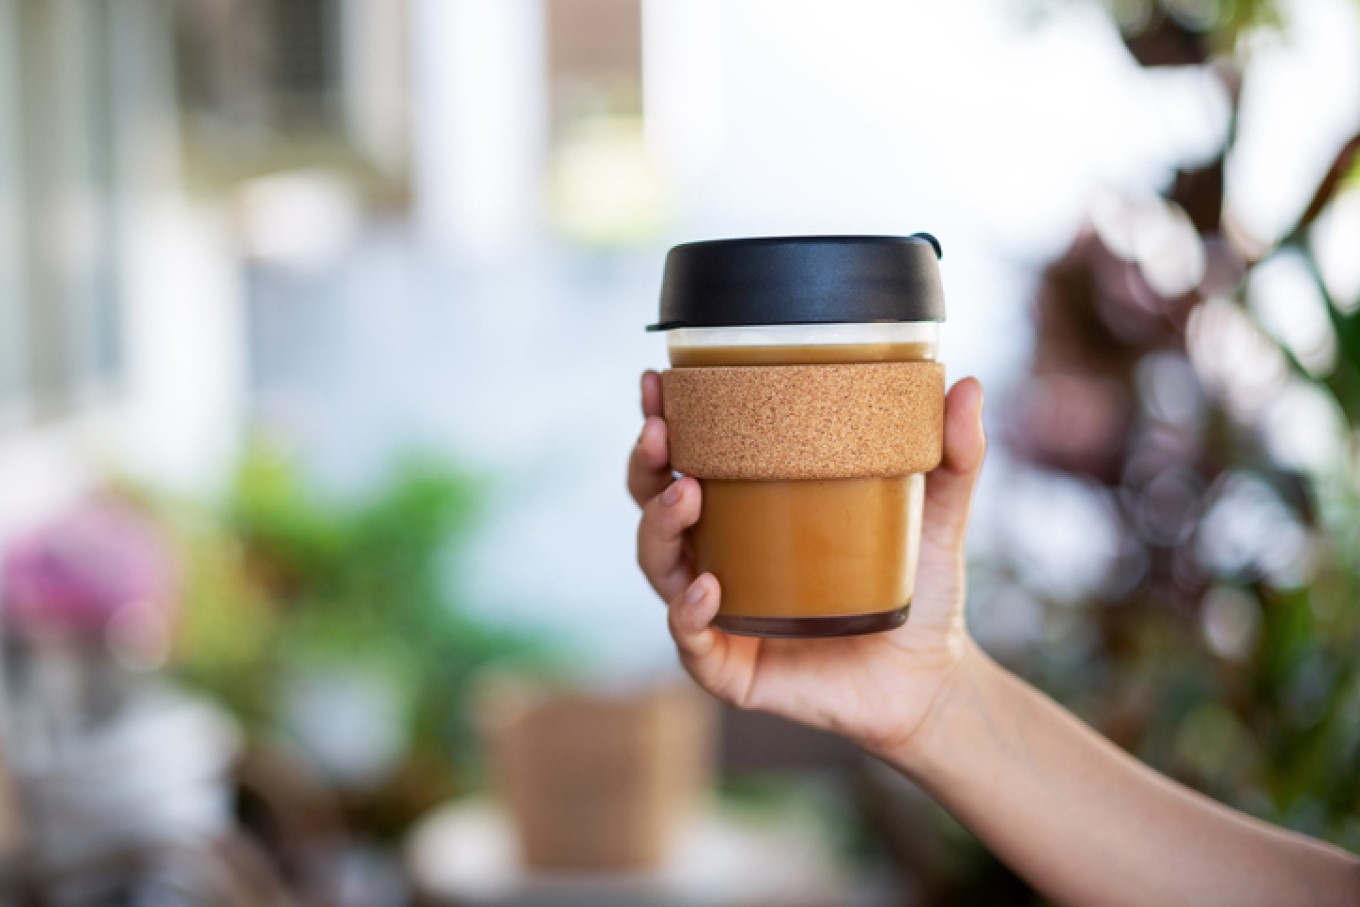 Make sure you take your keep cup to work on Reusable Wednesday and every day after that forever!